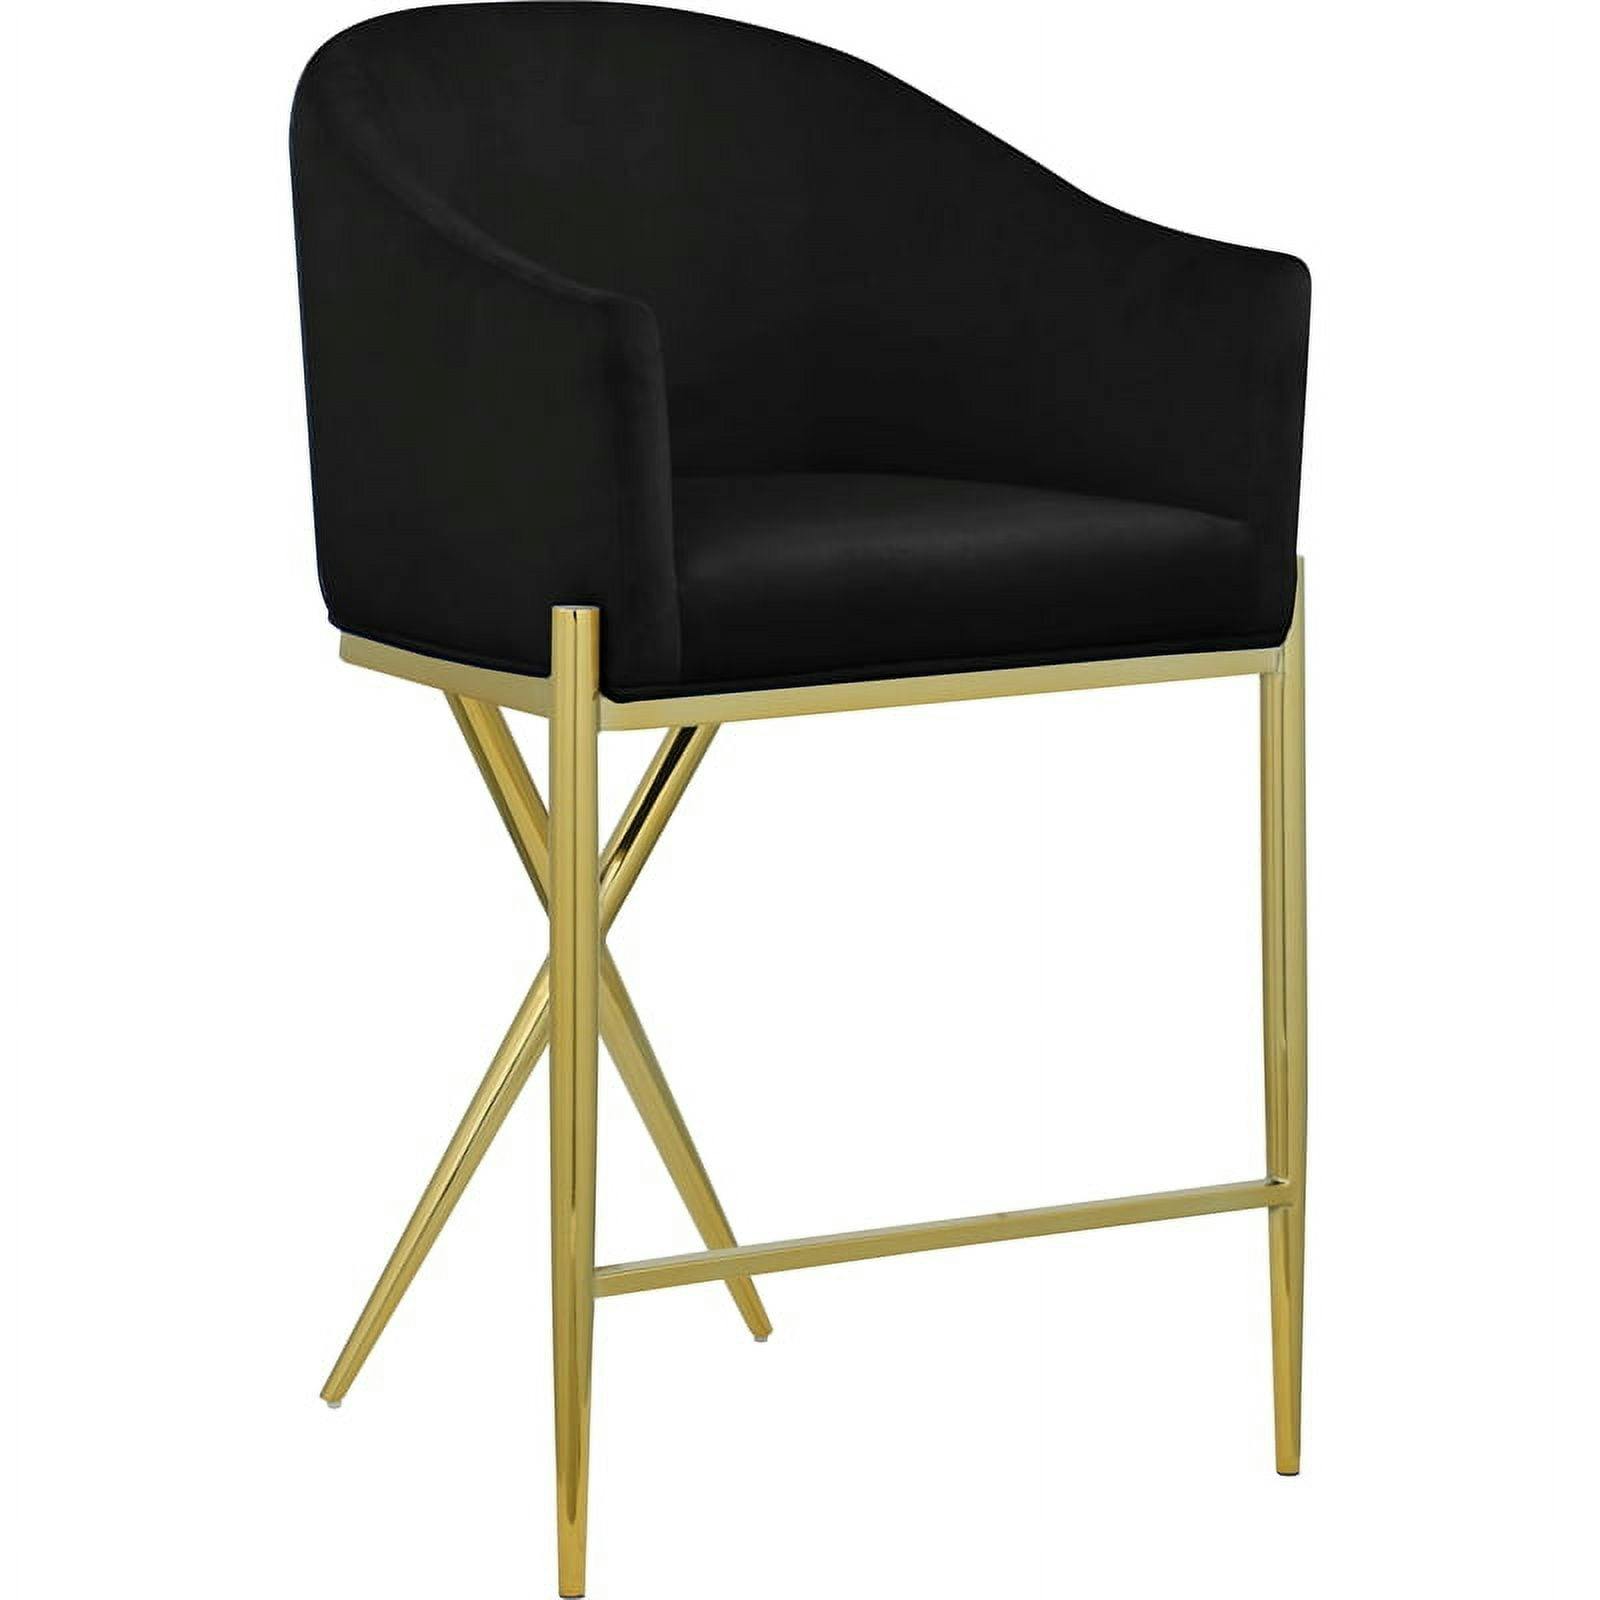 Velvet-Clad Black Counter Stool with Gold Metal Frame, 38" Height